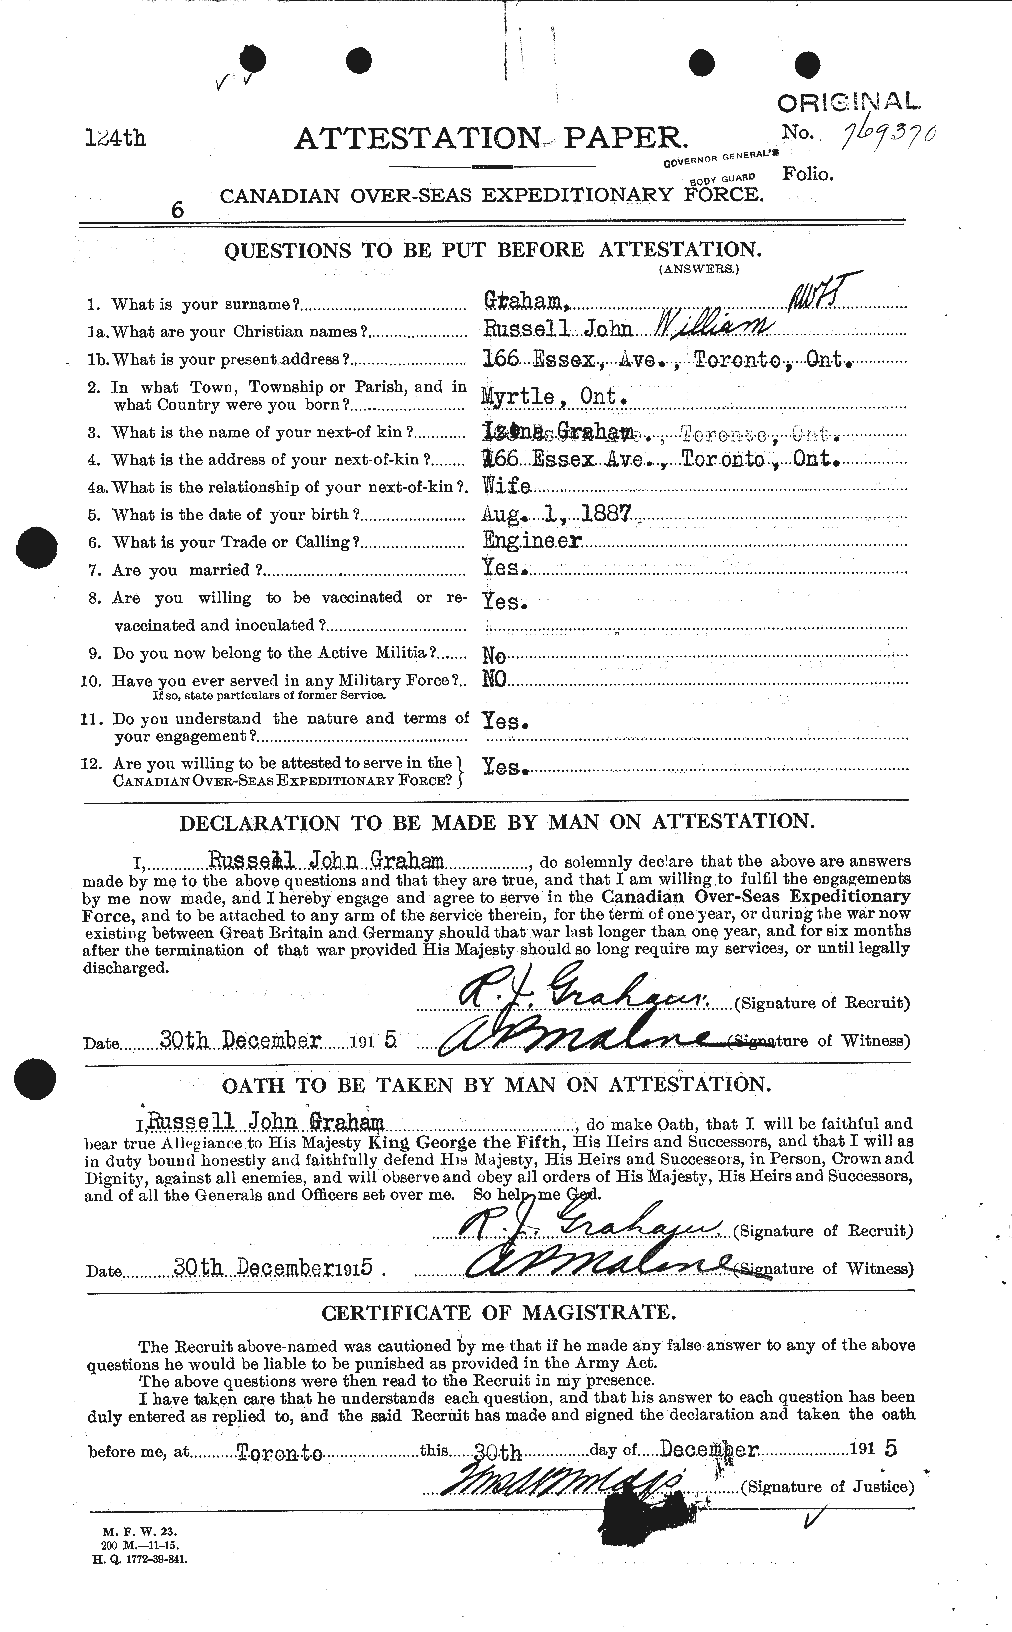 Personnel Records of the First World War - CEF 359447a